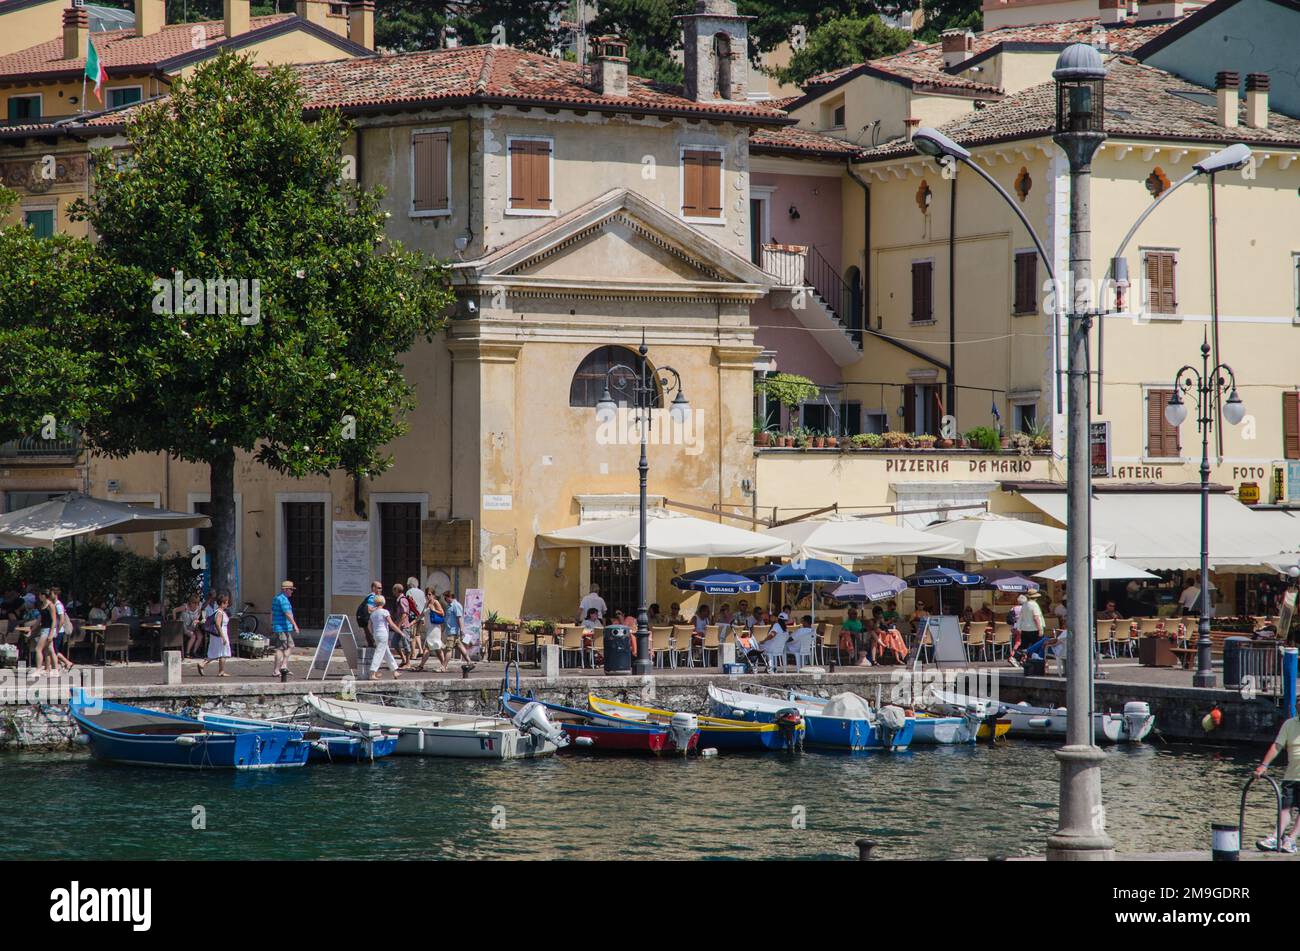 People relaxing in the bars on the waterfront in Malcesine, Lake Garda, Northern Italy Stock Photo